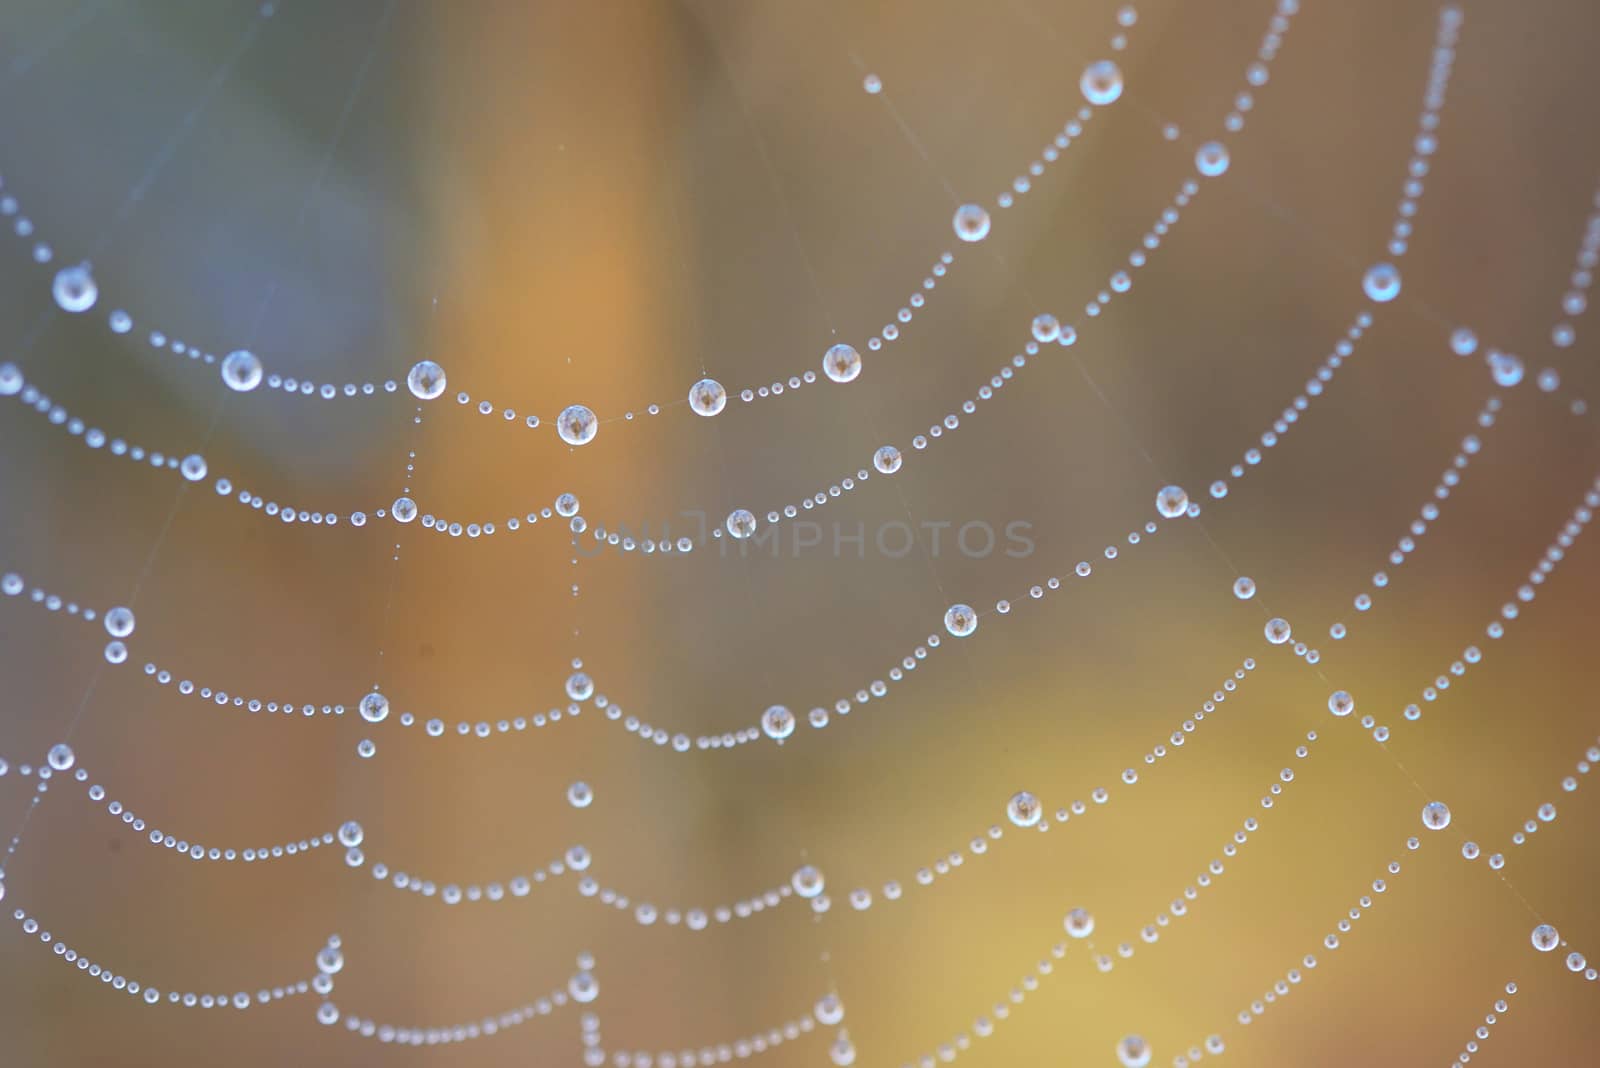 spider web with dew drops by jordachelr